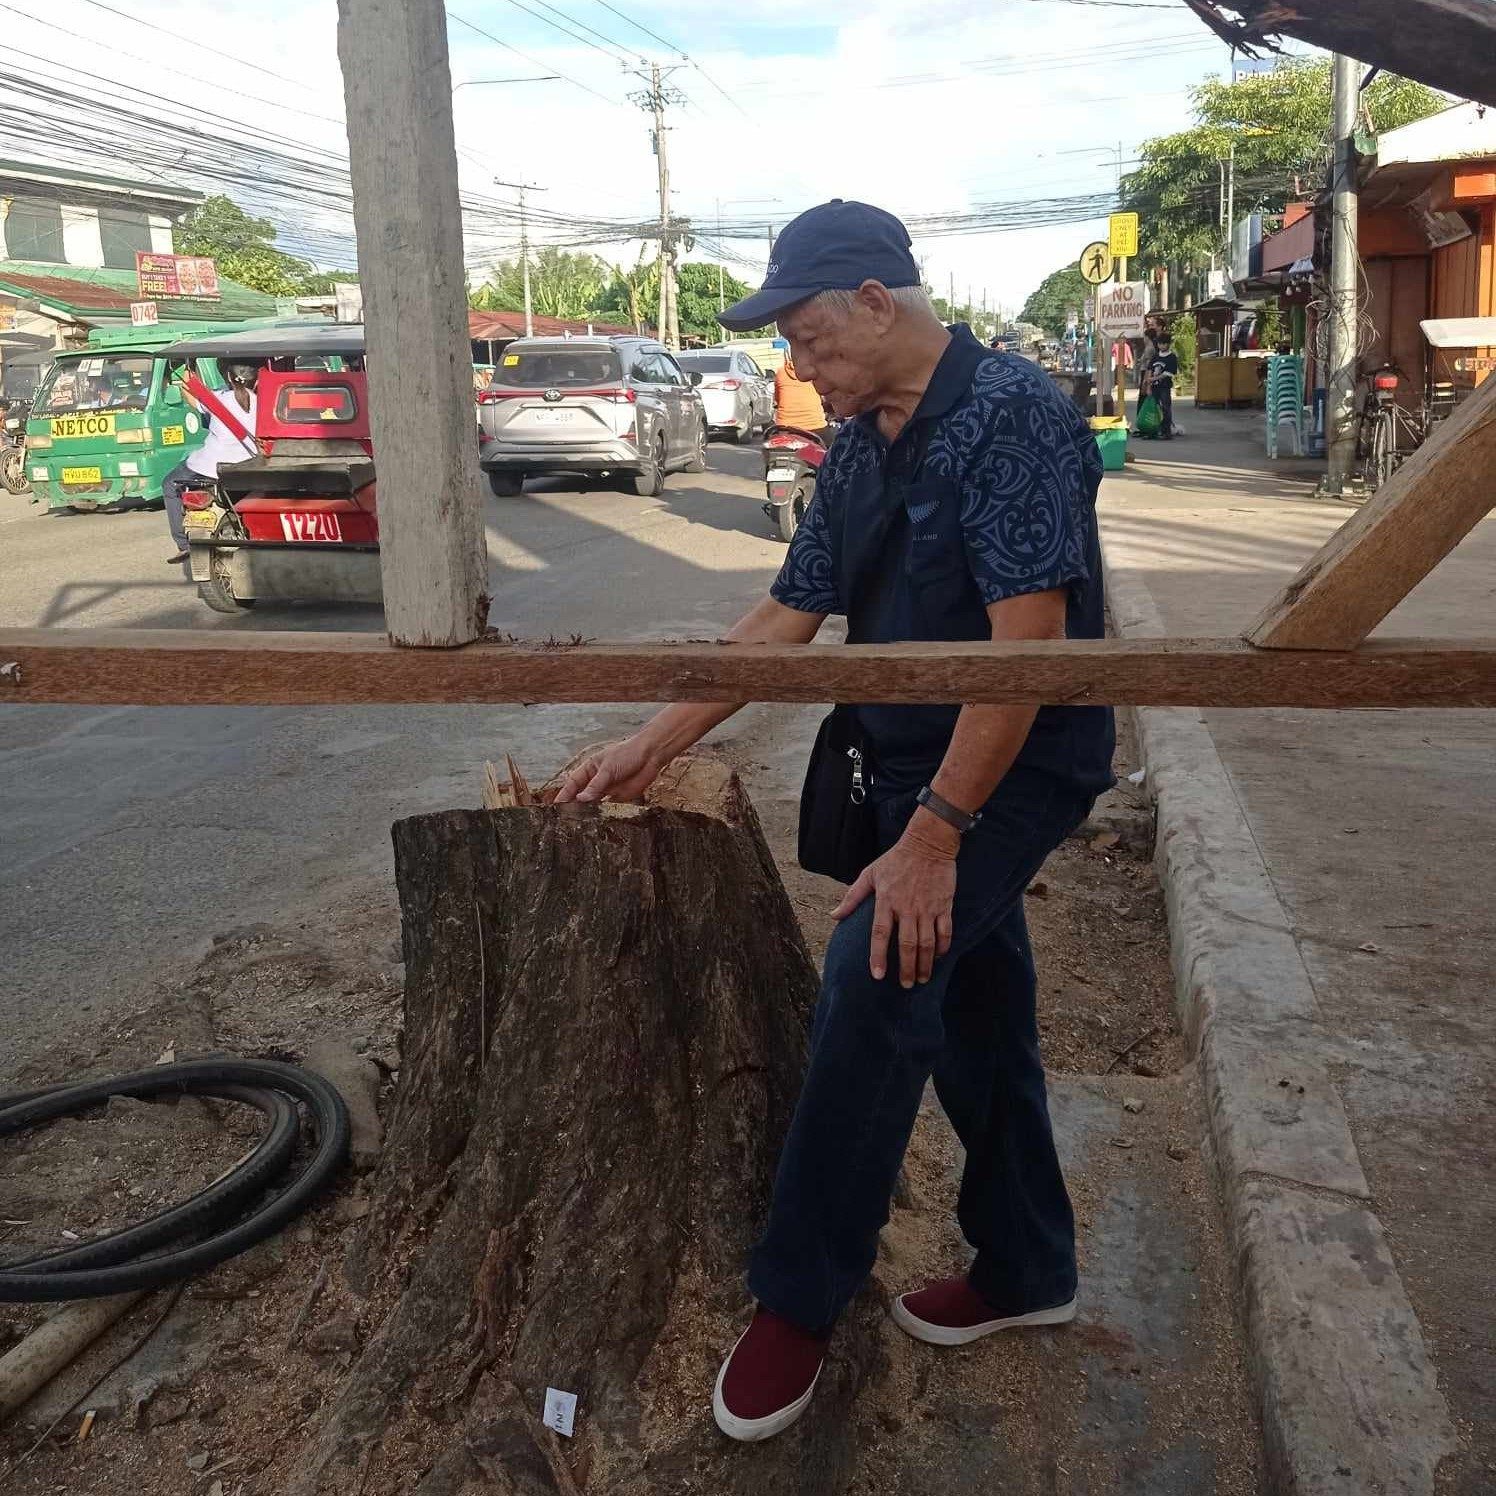 Forester blindsided by cutting of 60-year-old Narra tree in Tacloban